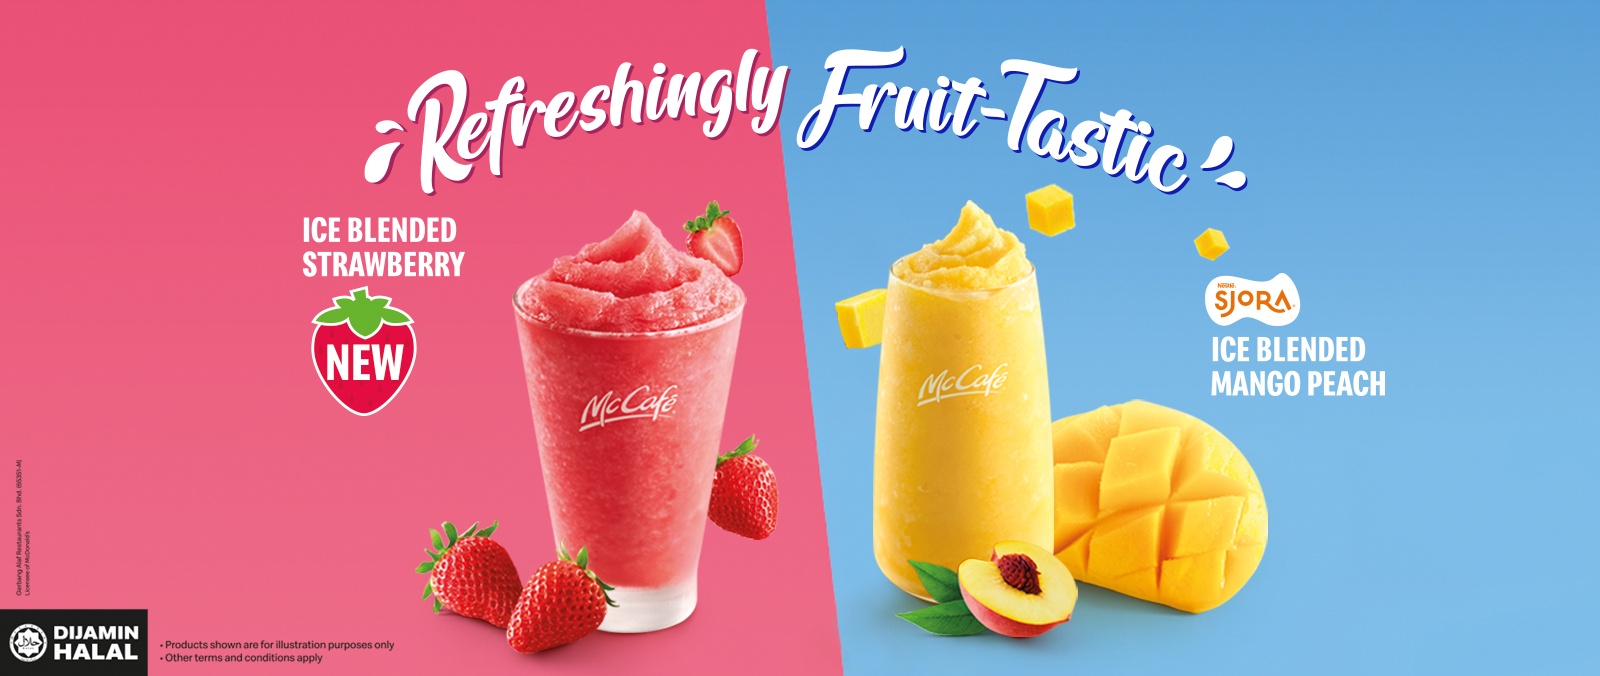 New Refreshing Fruity Series in Town!'s image'